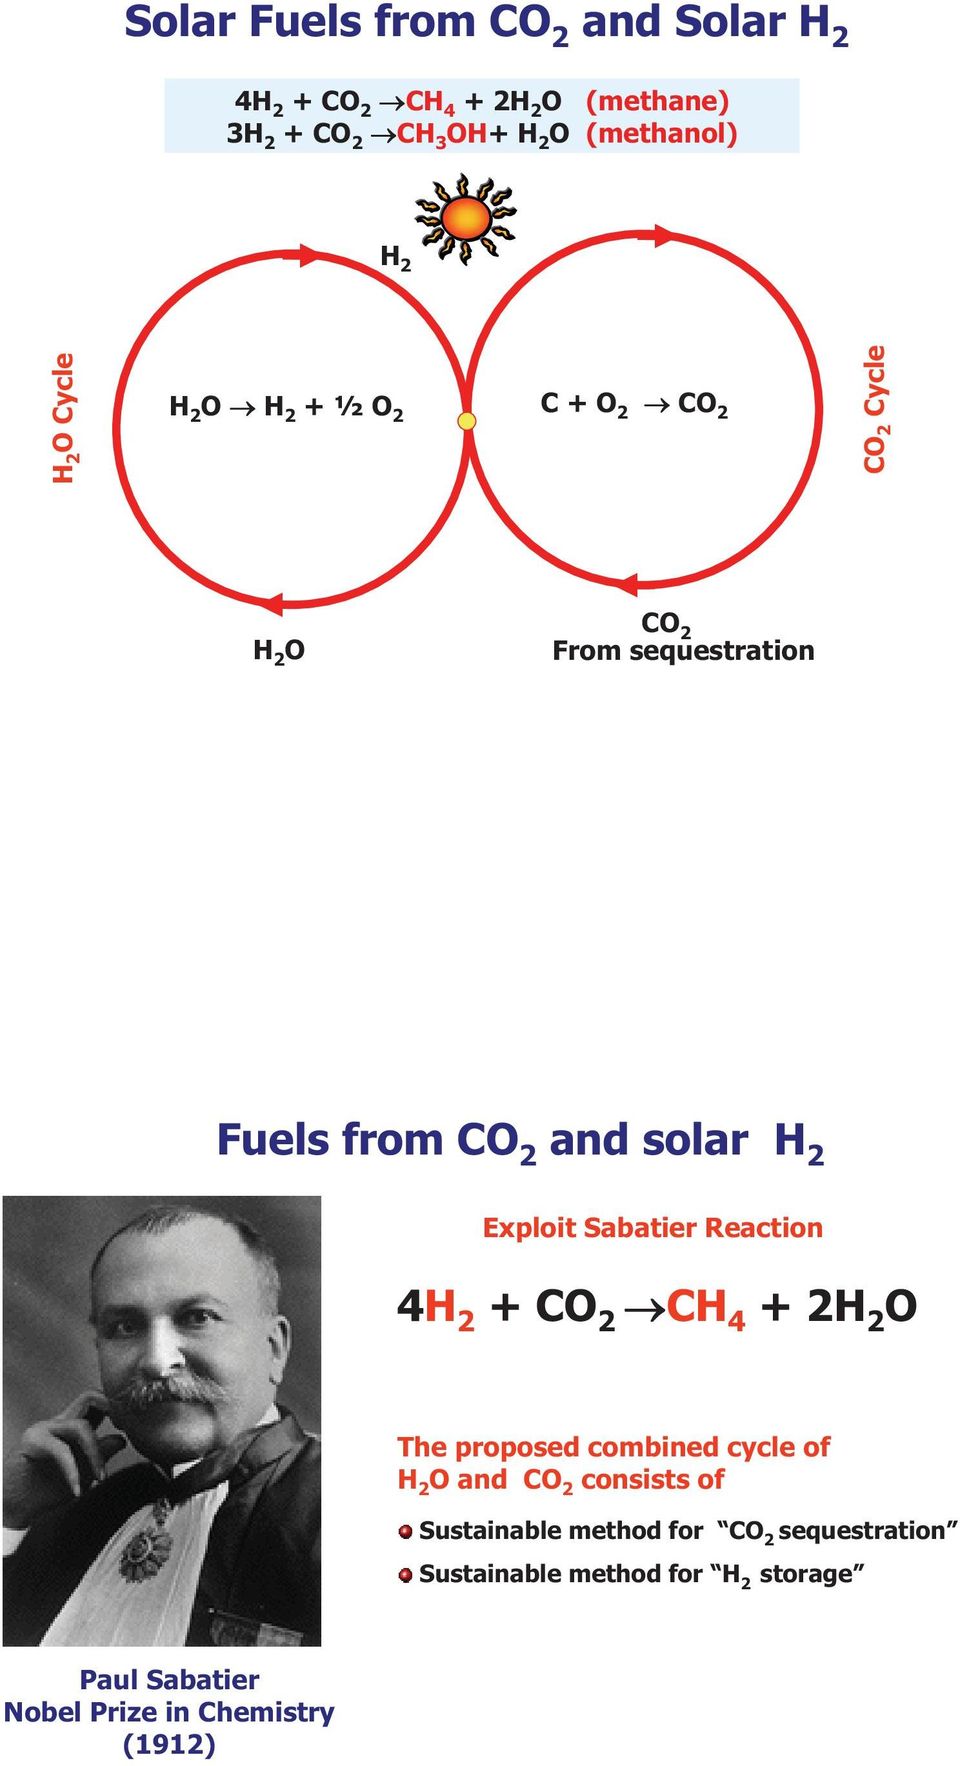 Sabatier Reaction 4 2 + CO 2 C 4 +2H 2 O The proposed combined cycle of H 2 O and CO 2 consists of